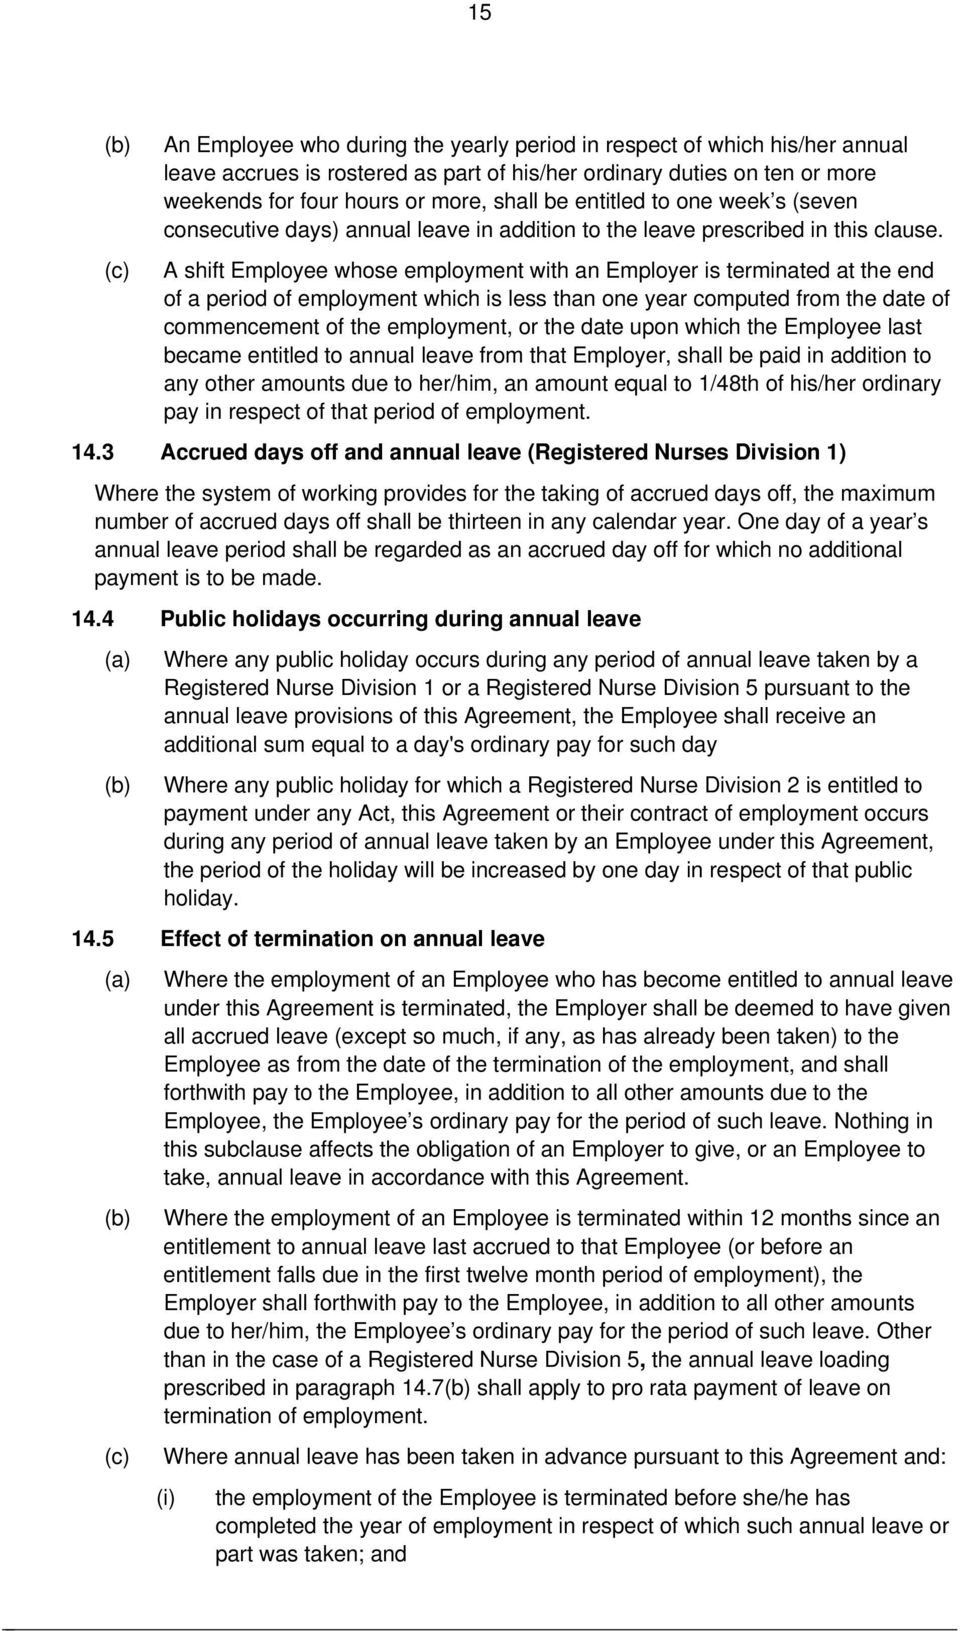 A shift Employee whose employment with an Employer is terminated at the end of a period of employment which is less than one year computed from the date of commencement of the employment, or the date